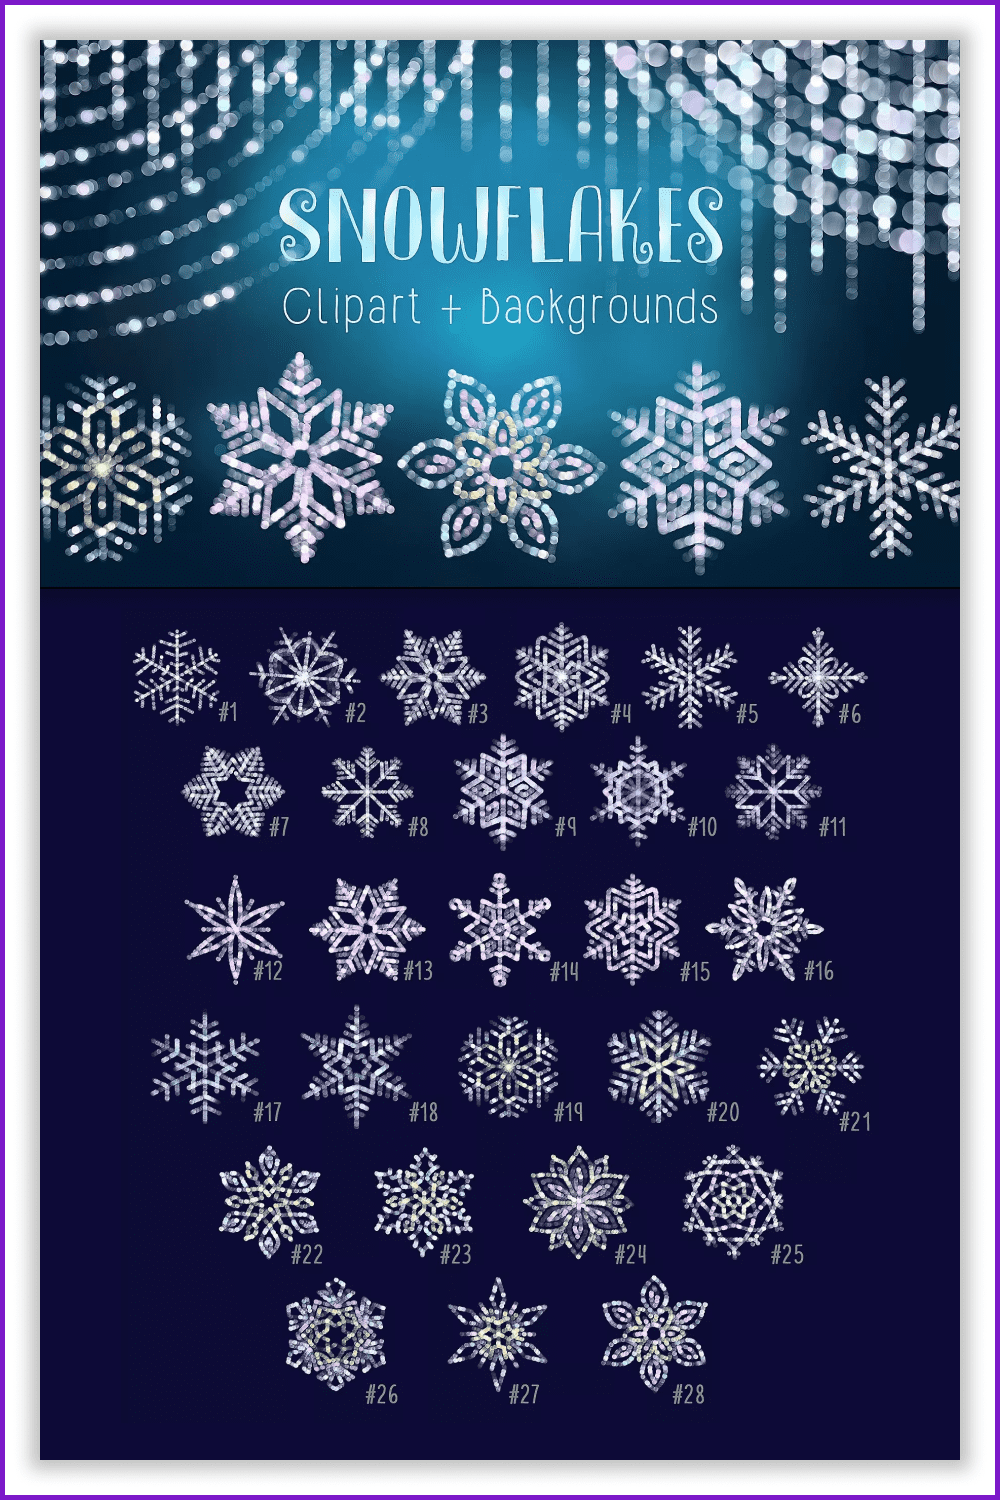 Collage of images of white snowflakes on a blue background.